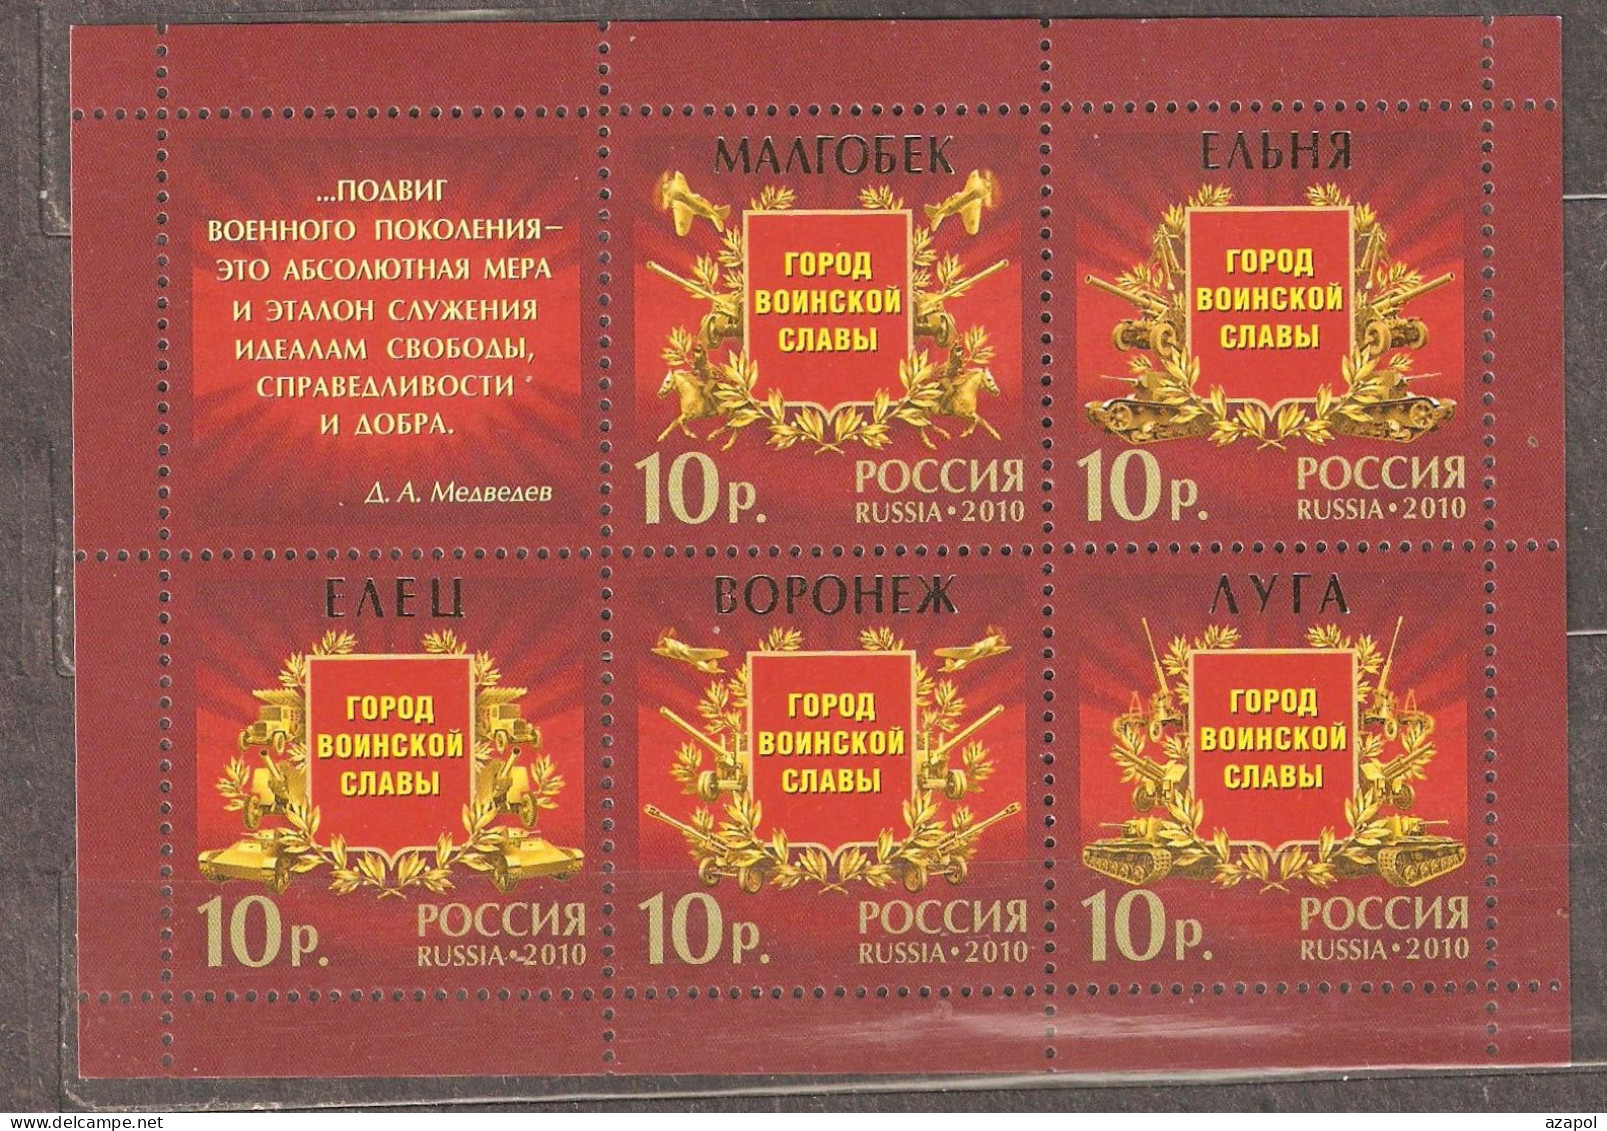 Russia: Mint Block, Cities Of Military Glory, 2010, Mi#Bl-131, MNH - Guerre Mondiale (Seconde)